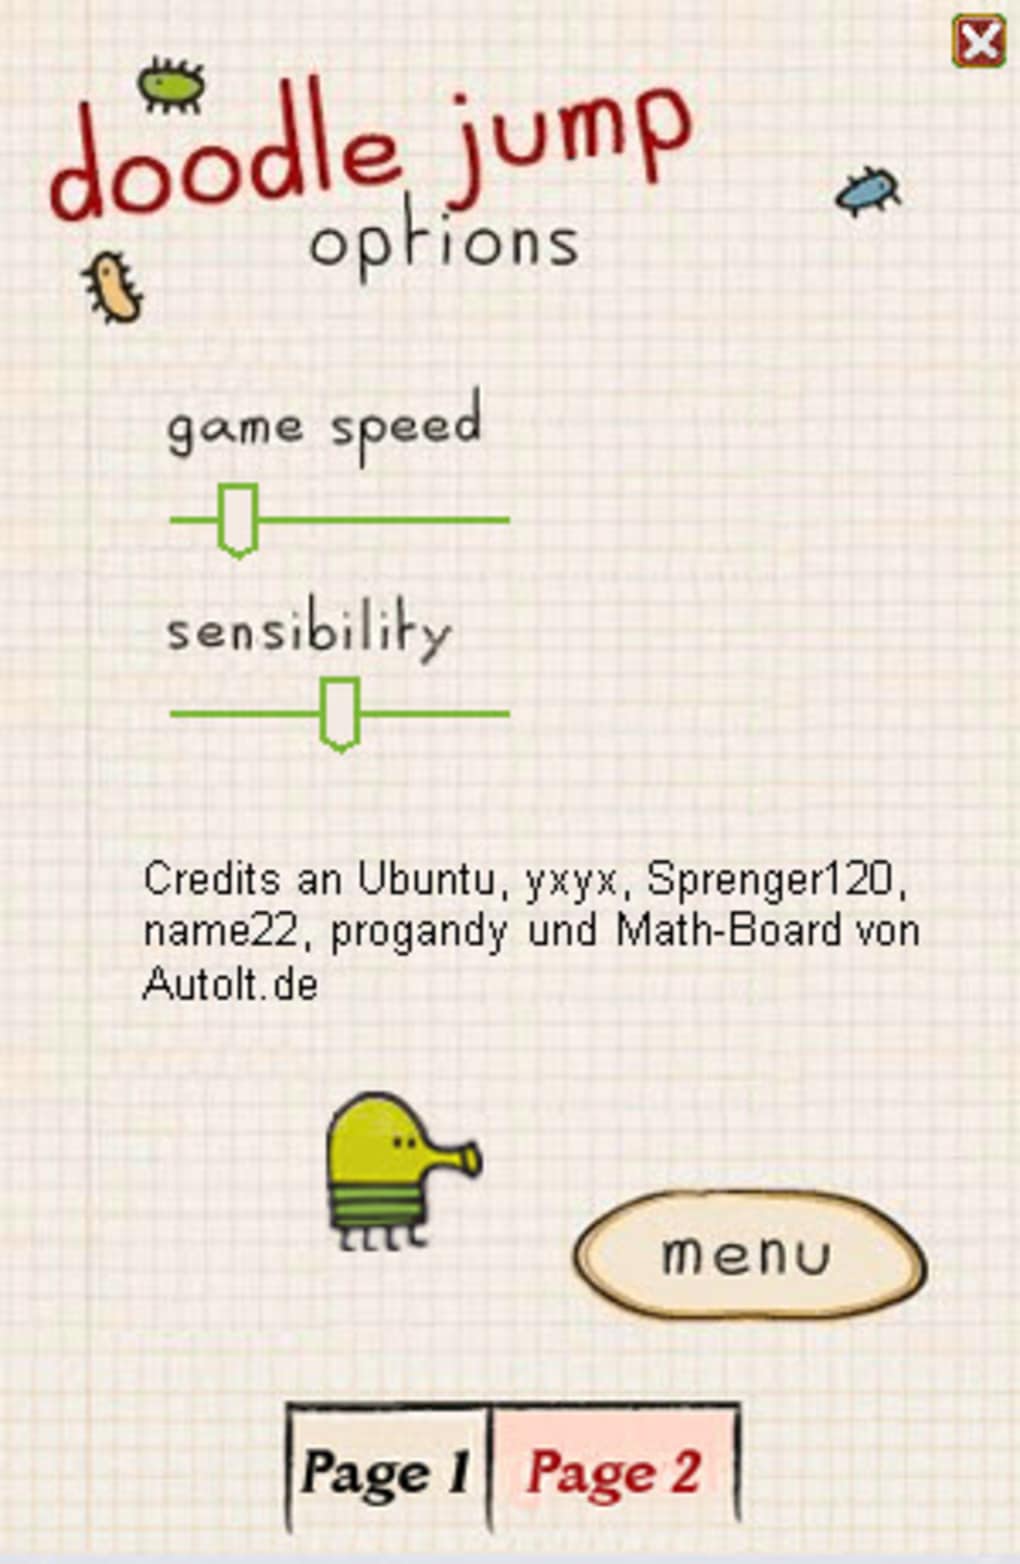 doodlejump glitch android